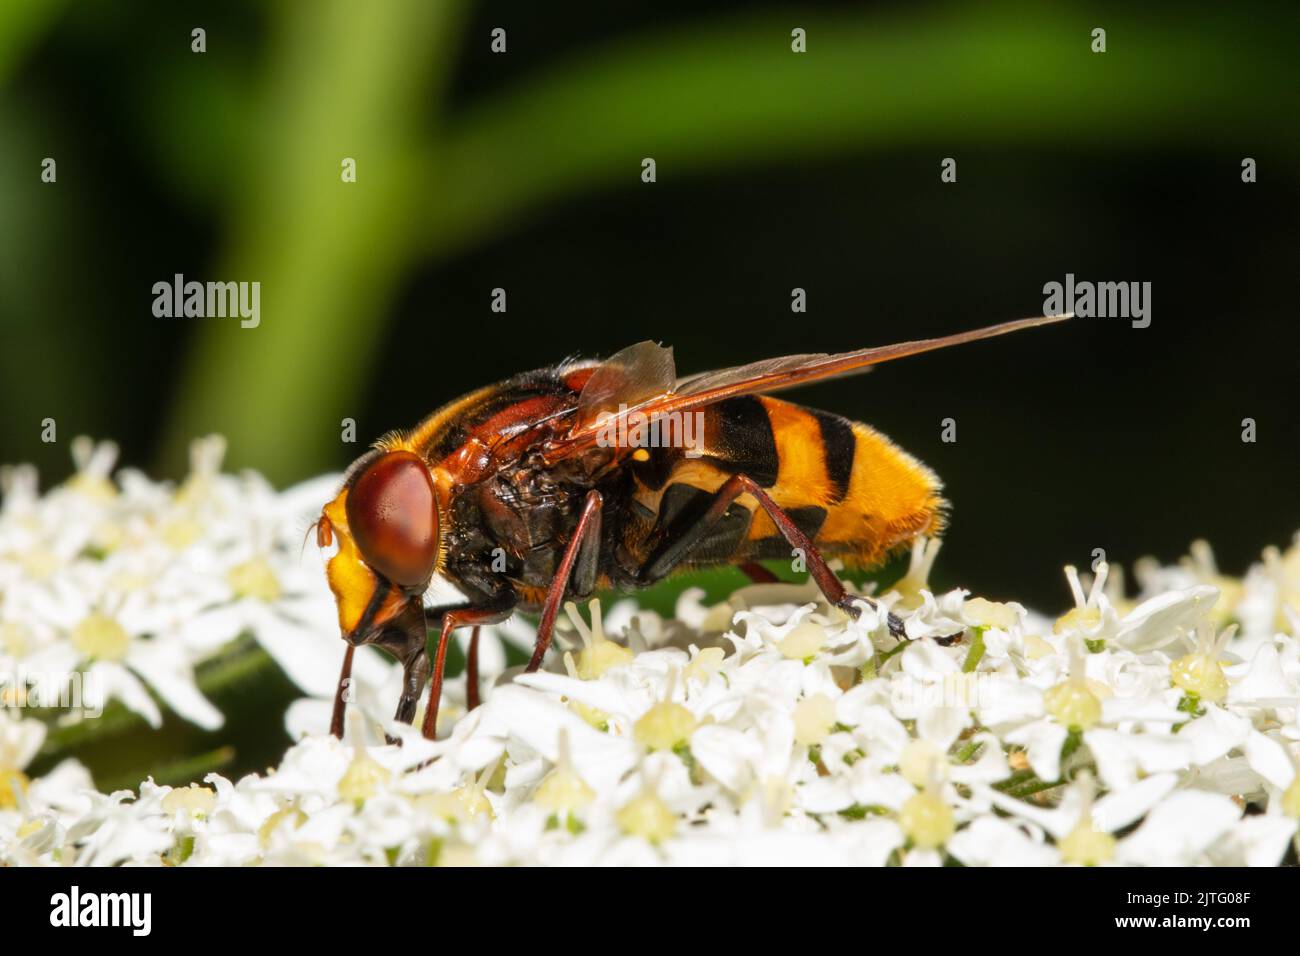 A hornet mimic hoverfly, Volucella zonaria, feeding on white flowers. Stock Photo